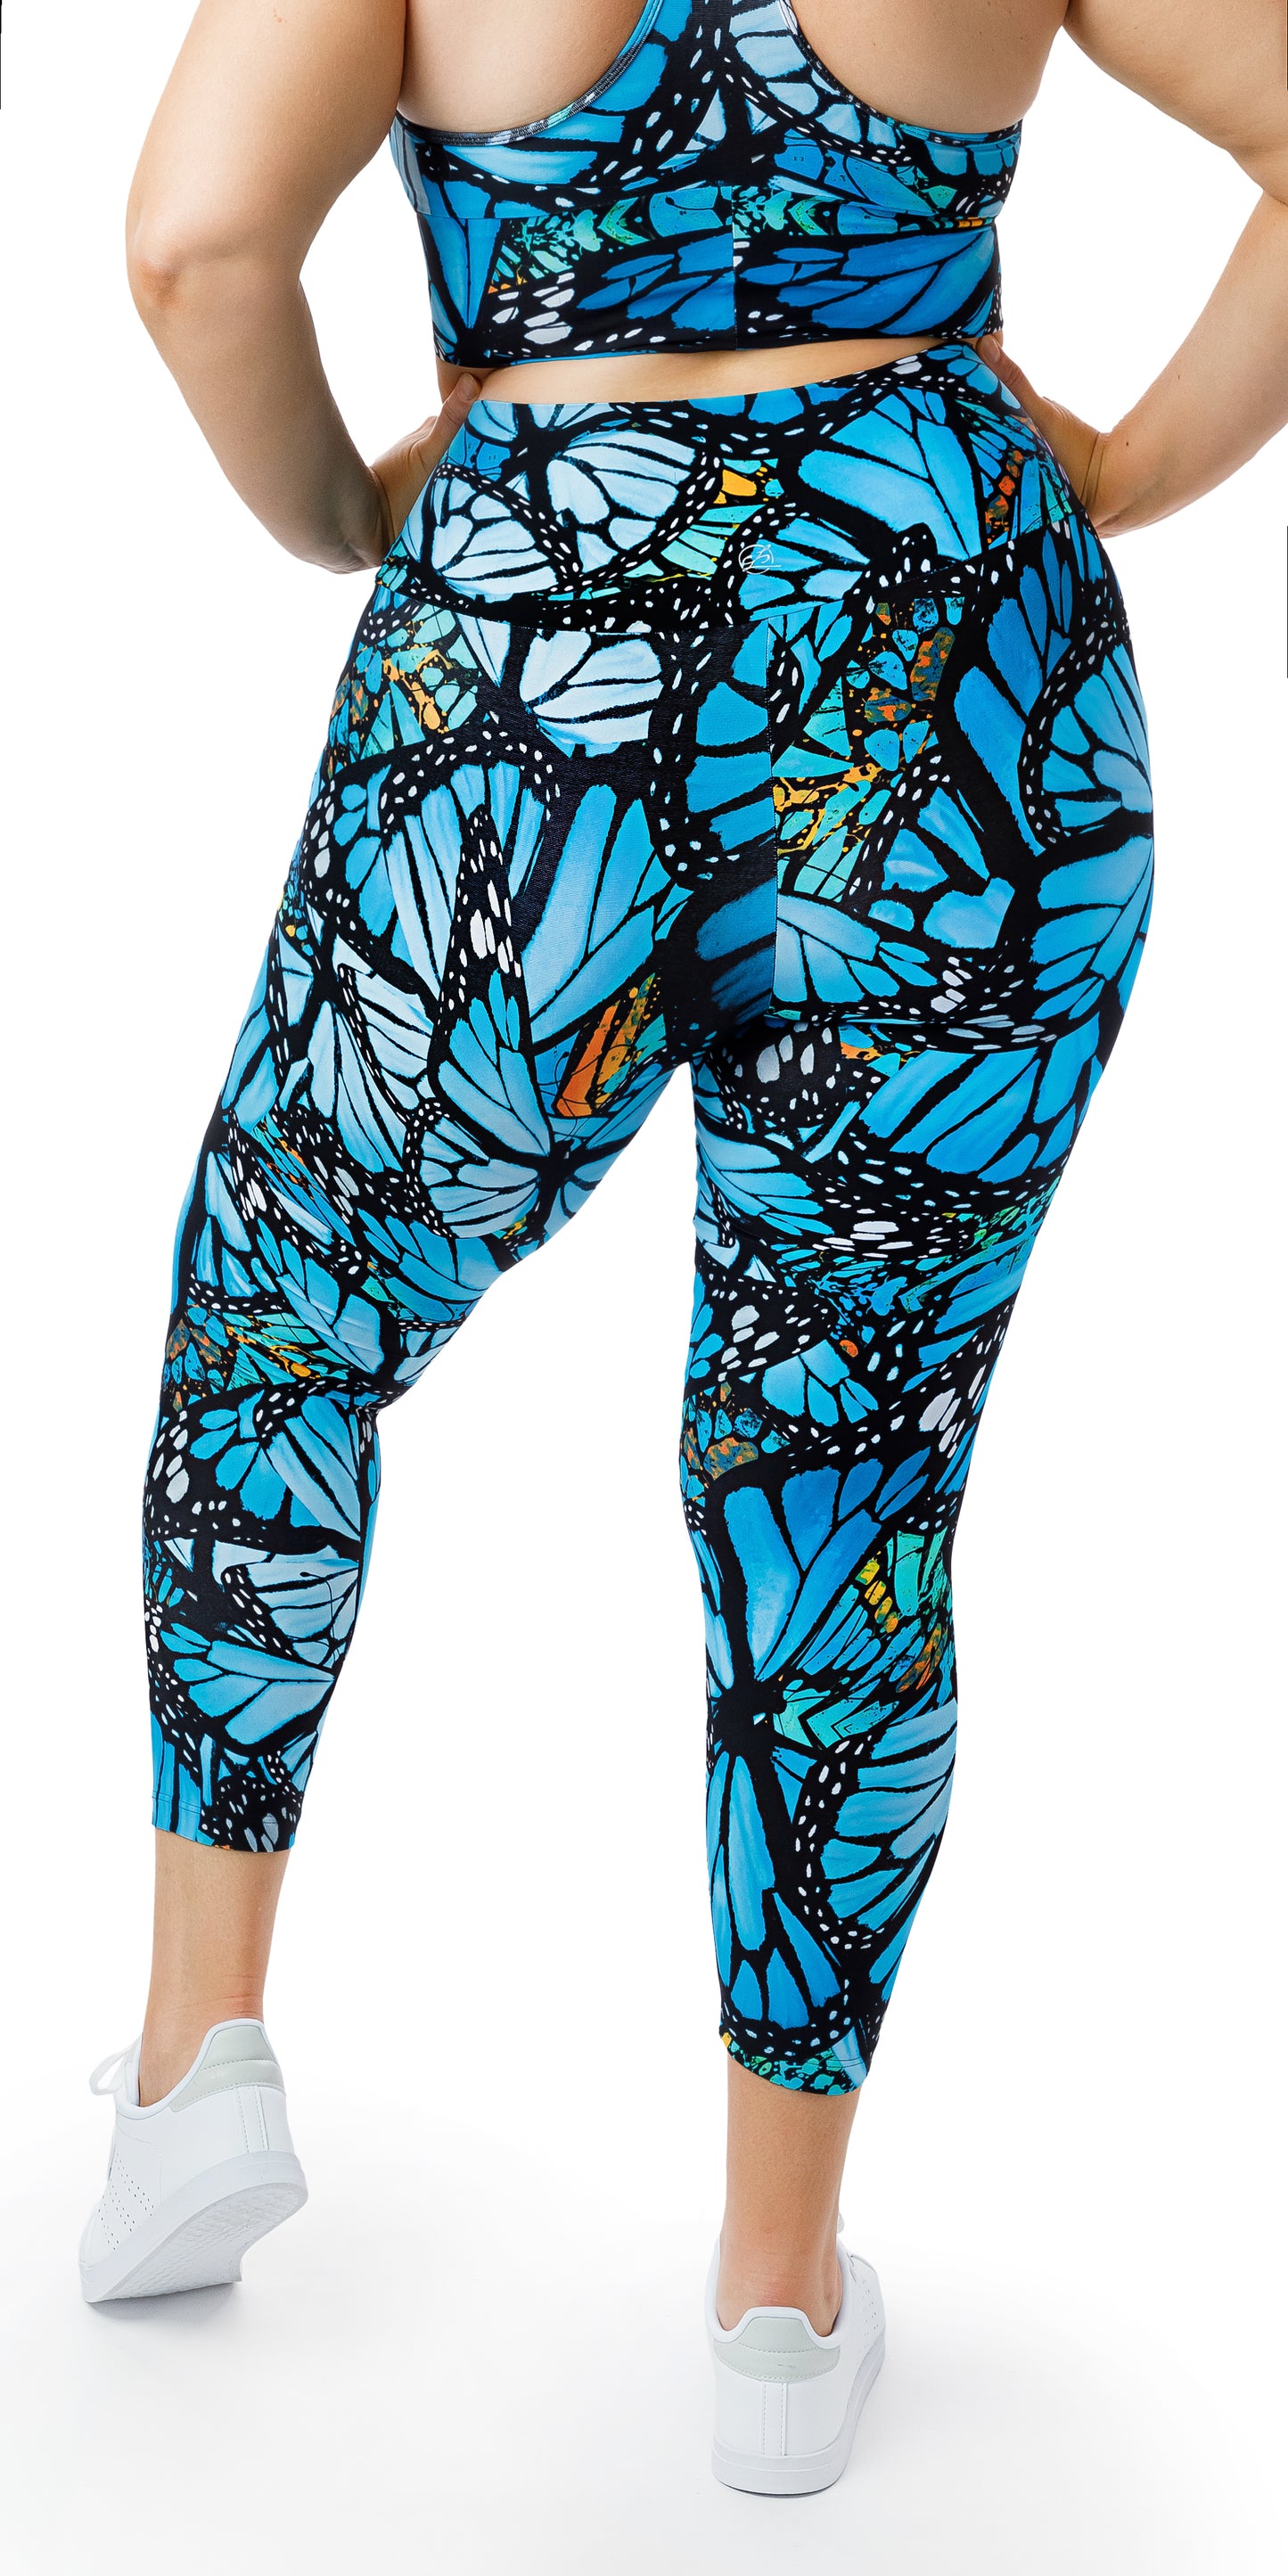 Rear view of girl in blue animal print JH Butterfly Ultra High Waist 7/8 Leggings putting both hands on her waist